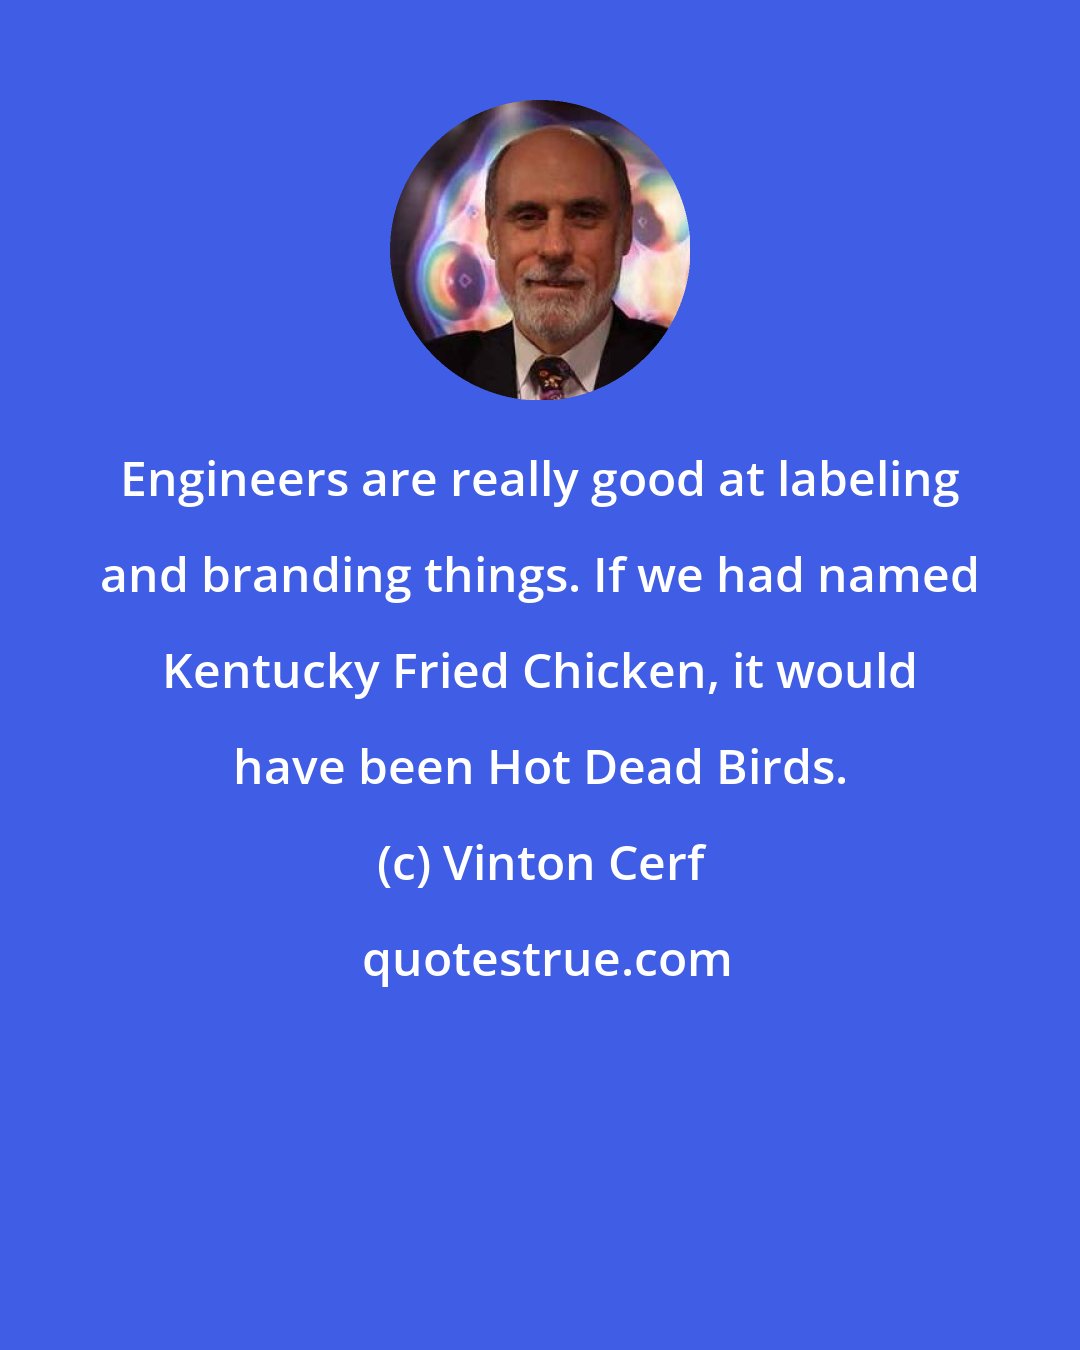 Vinton Cerf: Engineers are really good at labeling and branding things. If we had named Kentucky Fried Chicken, it would have been Hot Dead Birds.